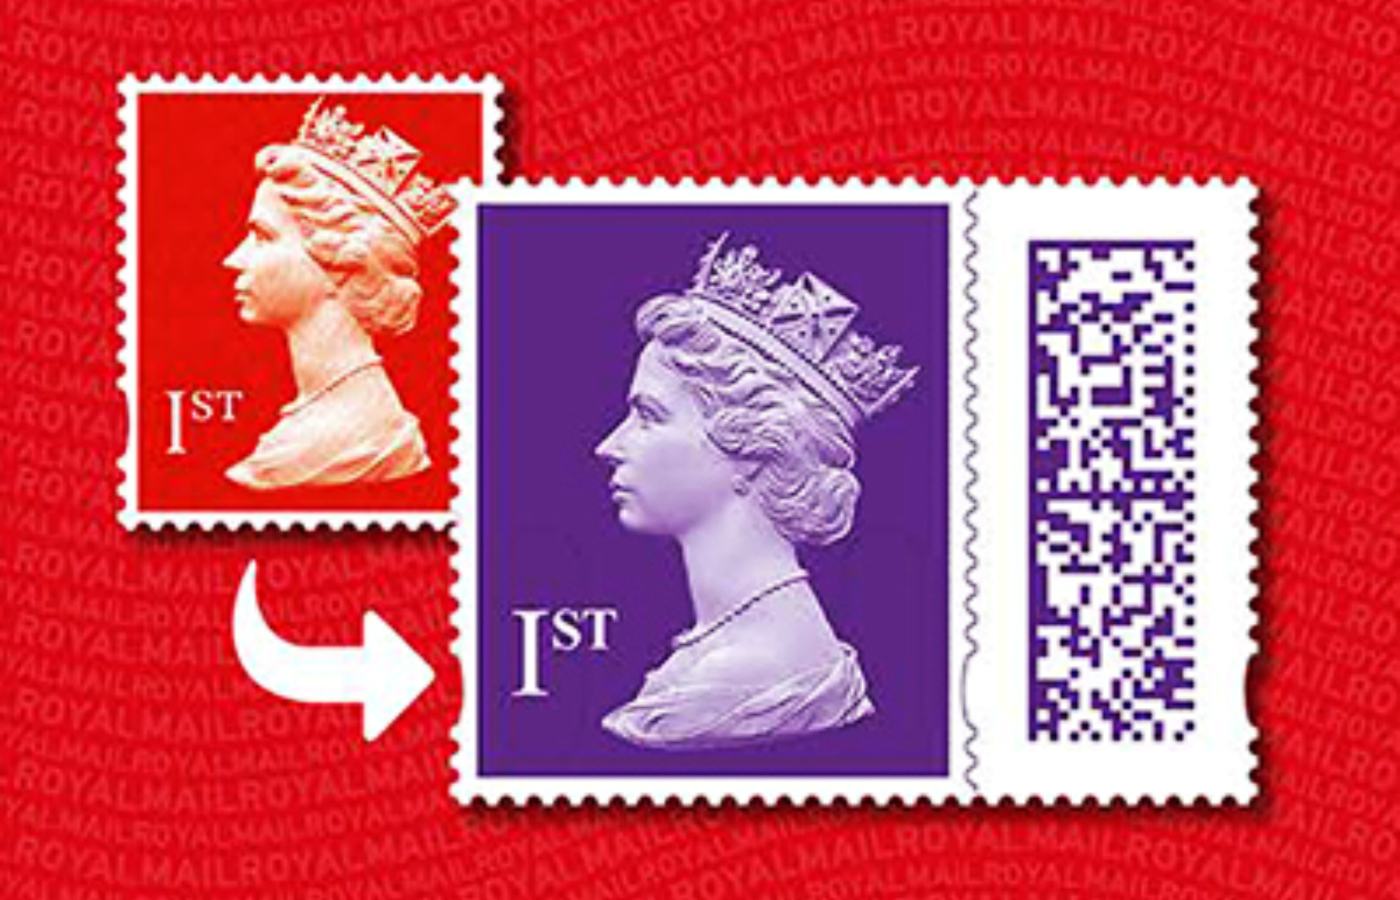 Royal Mail has added barcodes to all our regular stamps.